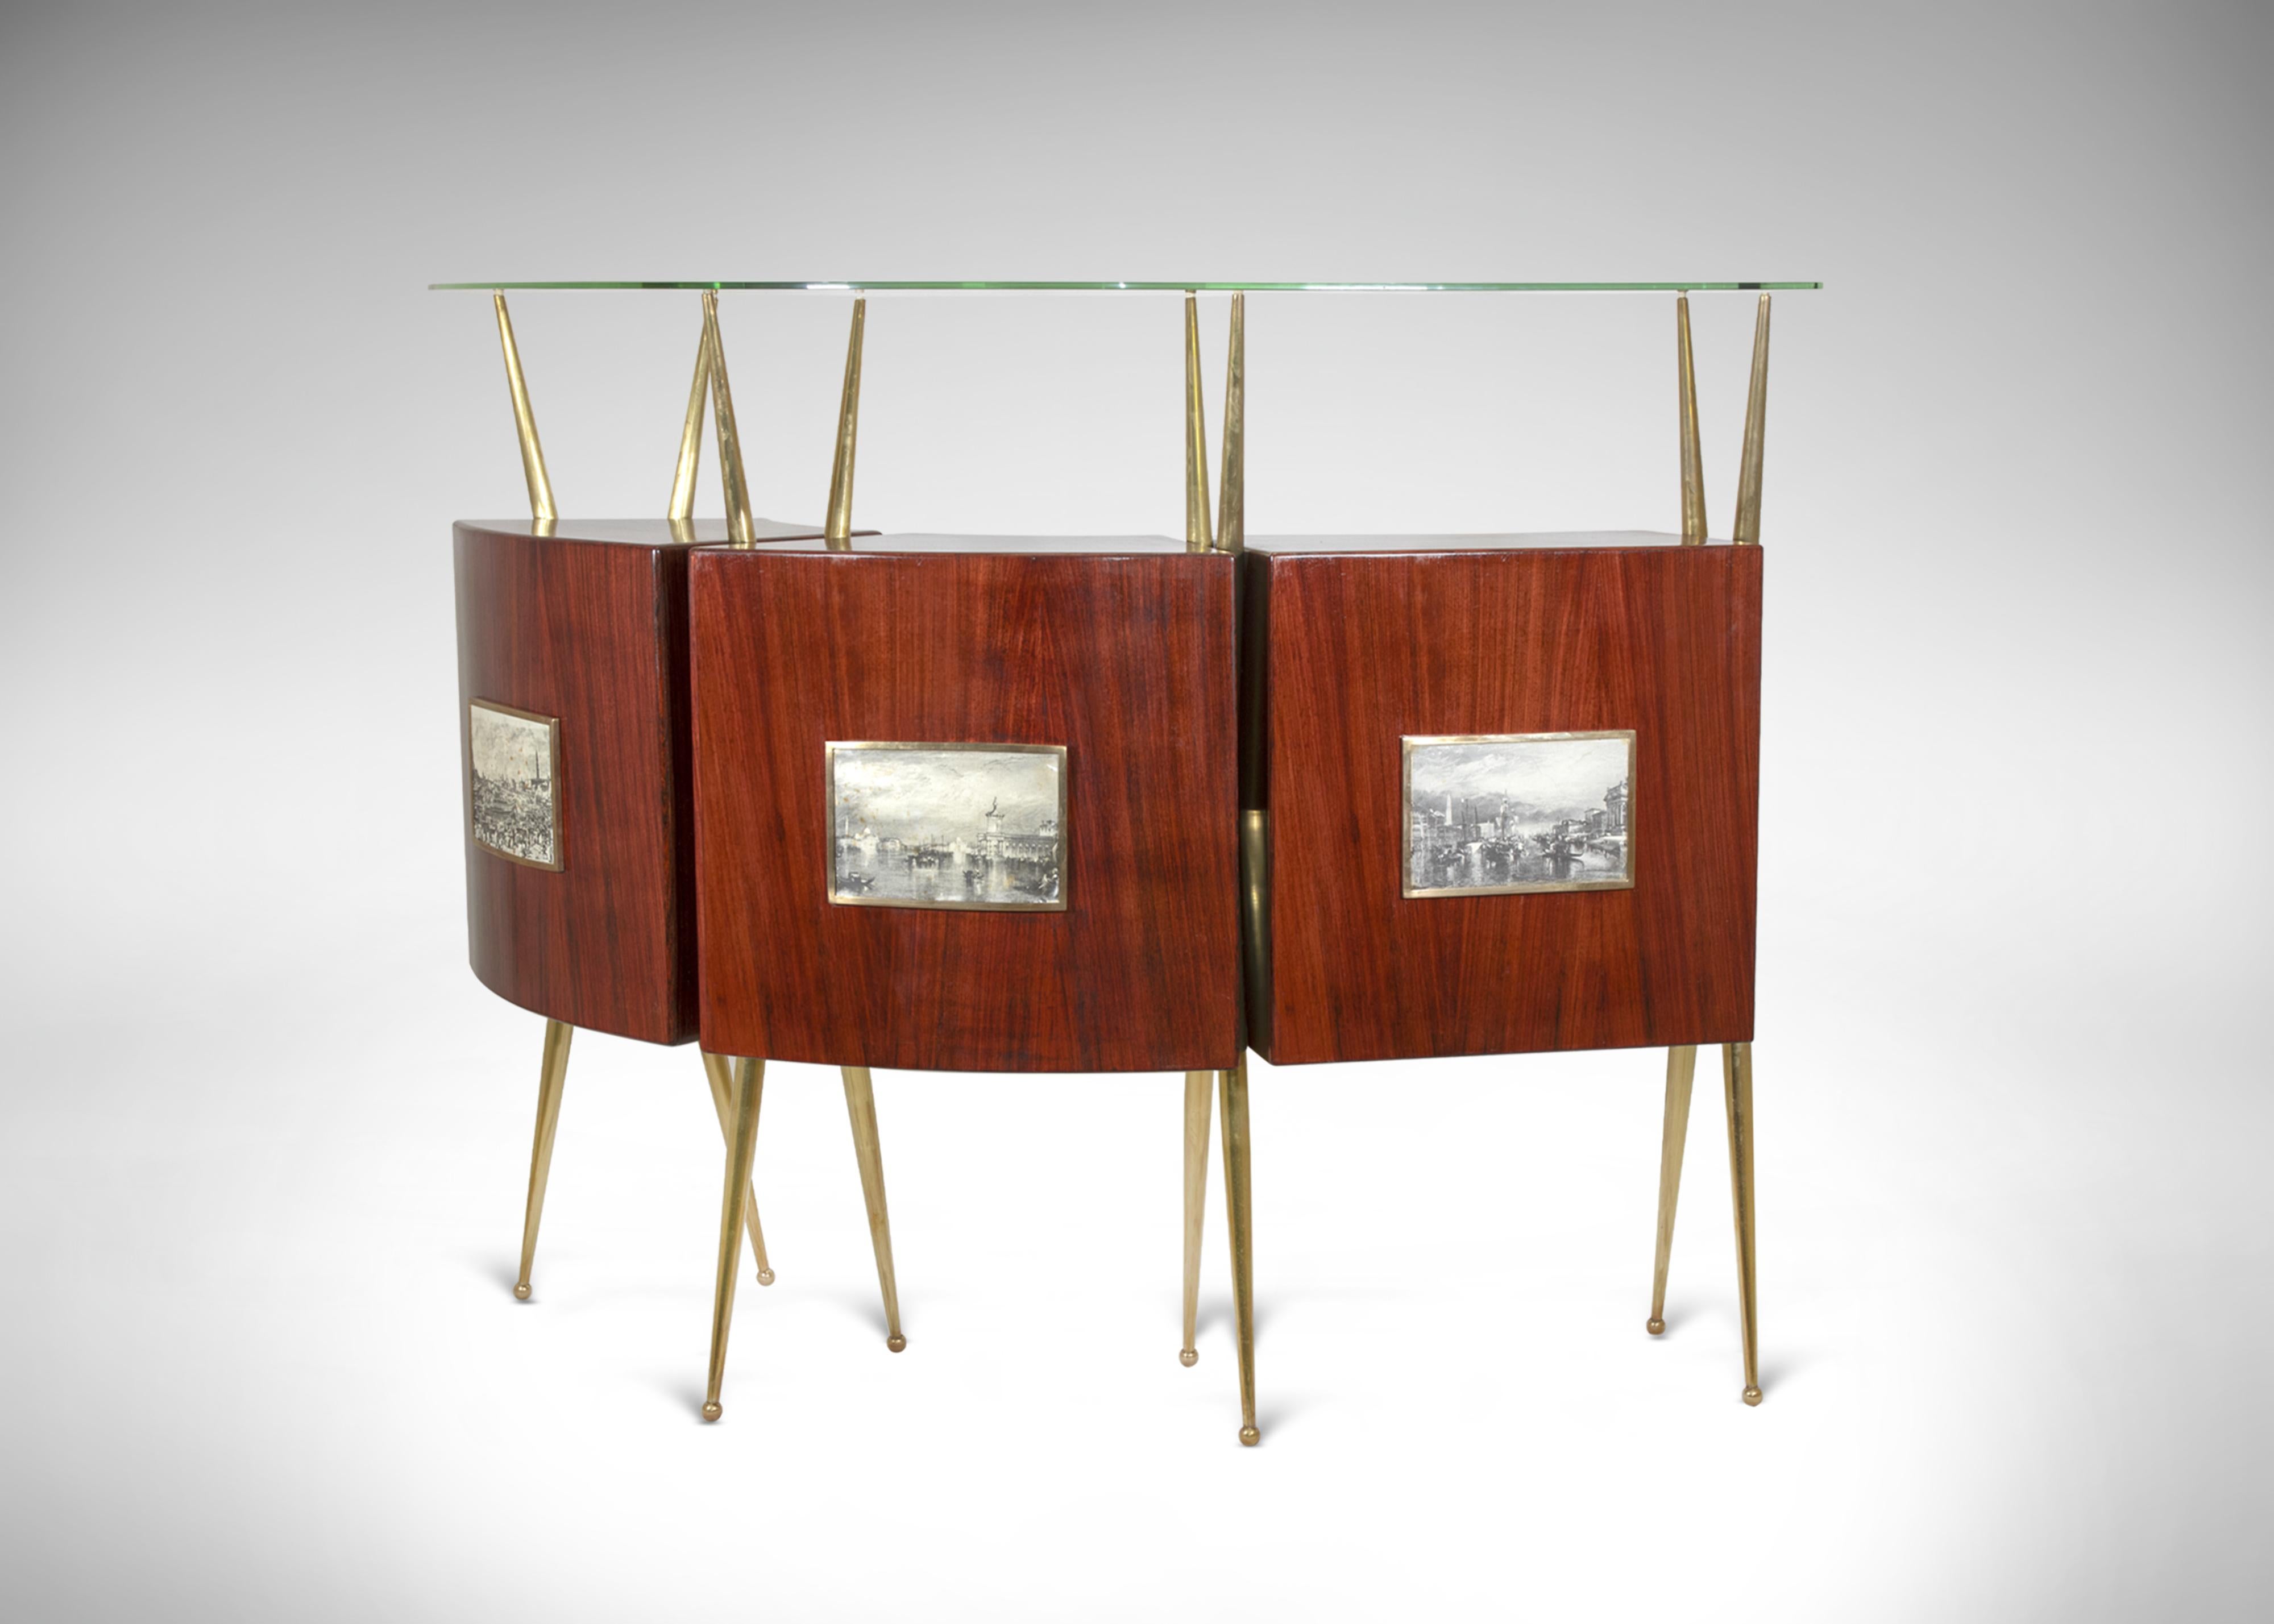 Vintage Italian dry bar is a midcentury design modern Italian bar in the style of Gio Ponti, circa 1950s.

This beautiful bar cabinet consists of one high wall-console, one curved serving cabinet, and two brass stools with white moleskin seats both